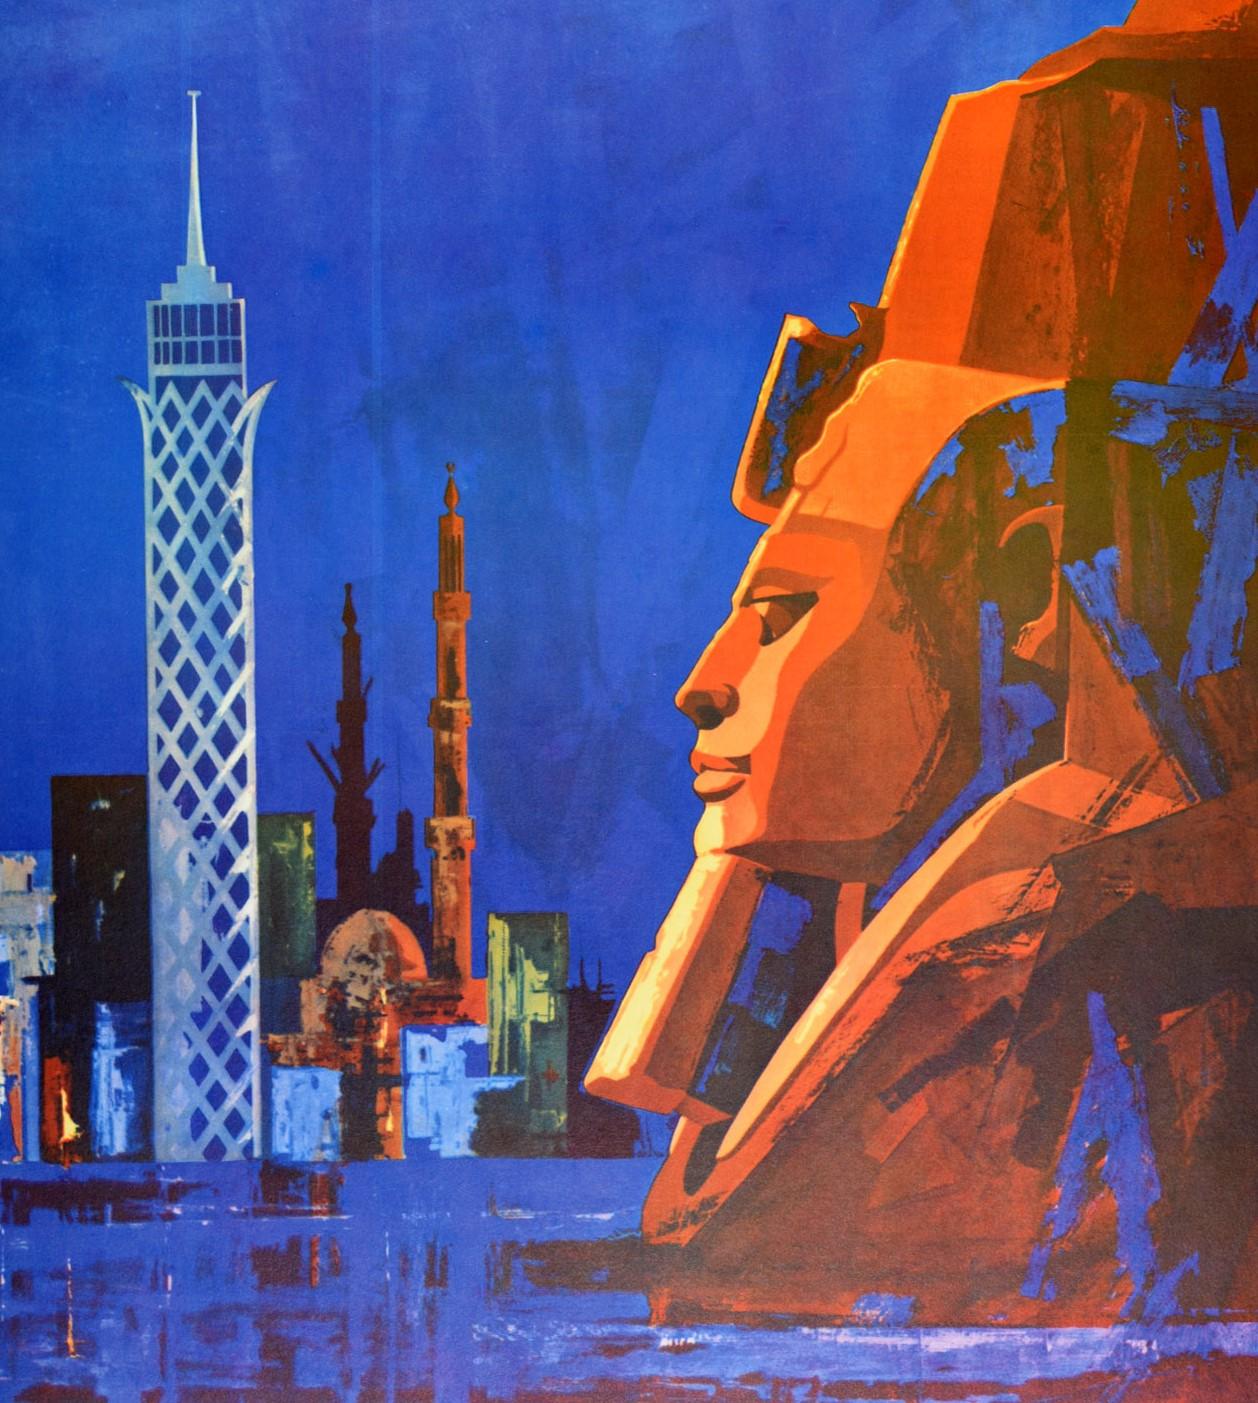 Original vintage travel poster for Egypt UAR (United Arab Republic; 1958-1971) featuring traditional and modern city buildings against the dark blue shaded background with an ancient Sphinx head in the foreground. Excellent condition.